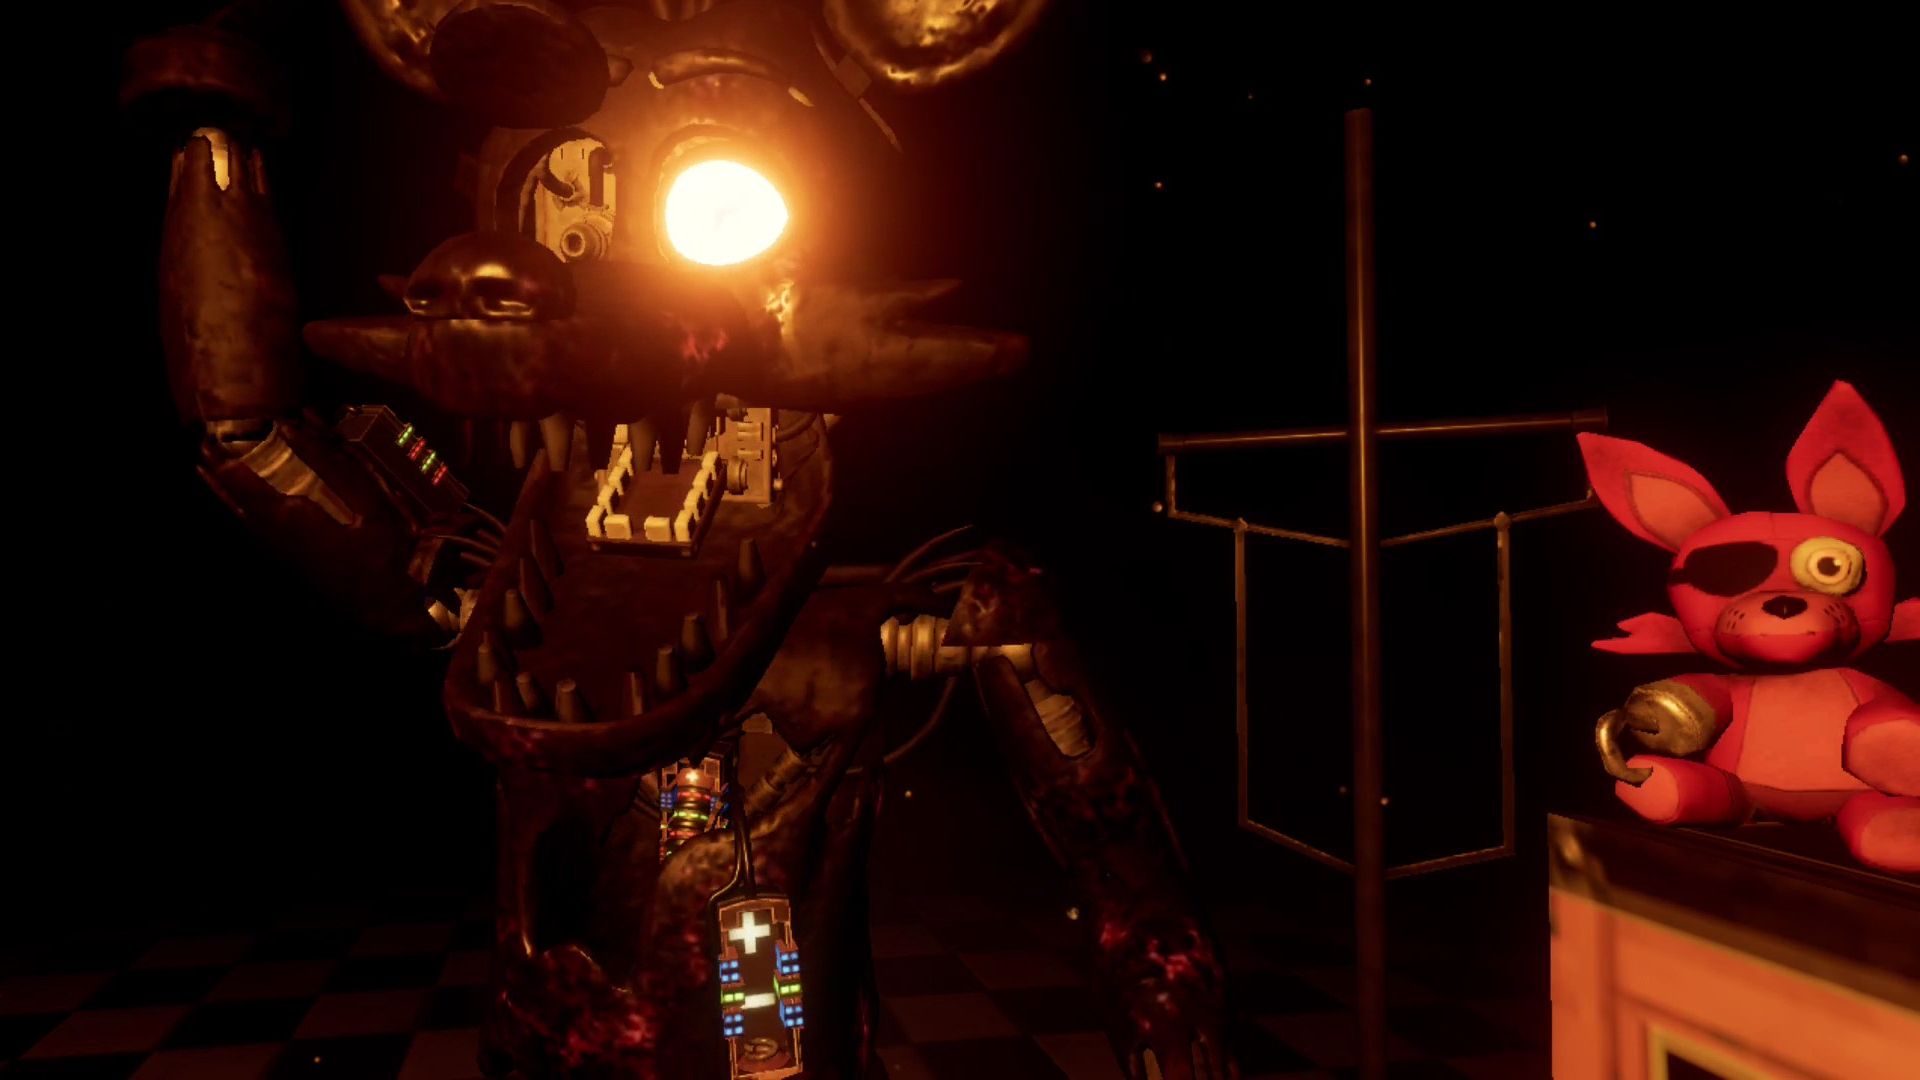 Download & Play FNaF 6: Pizzeria Simulator on PC with NoxPlayer - Appcenter